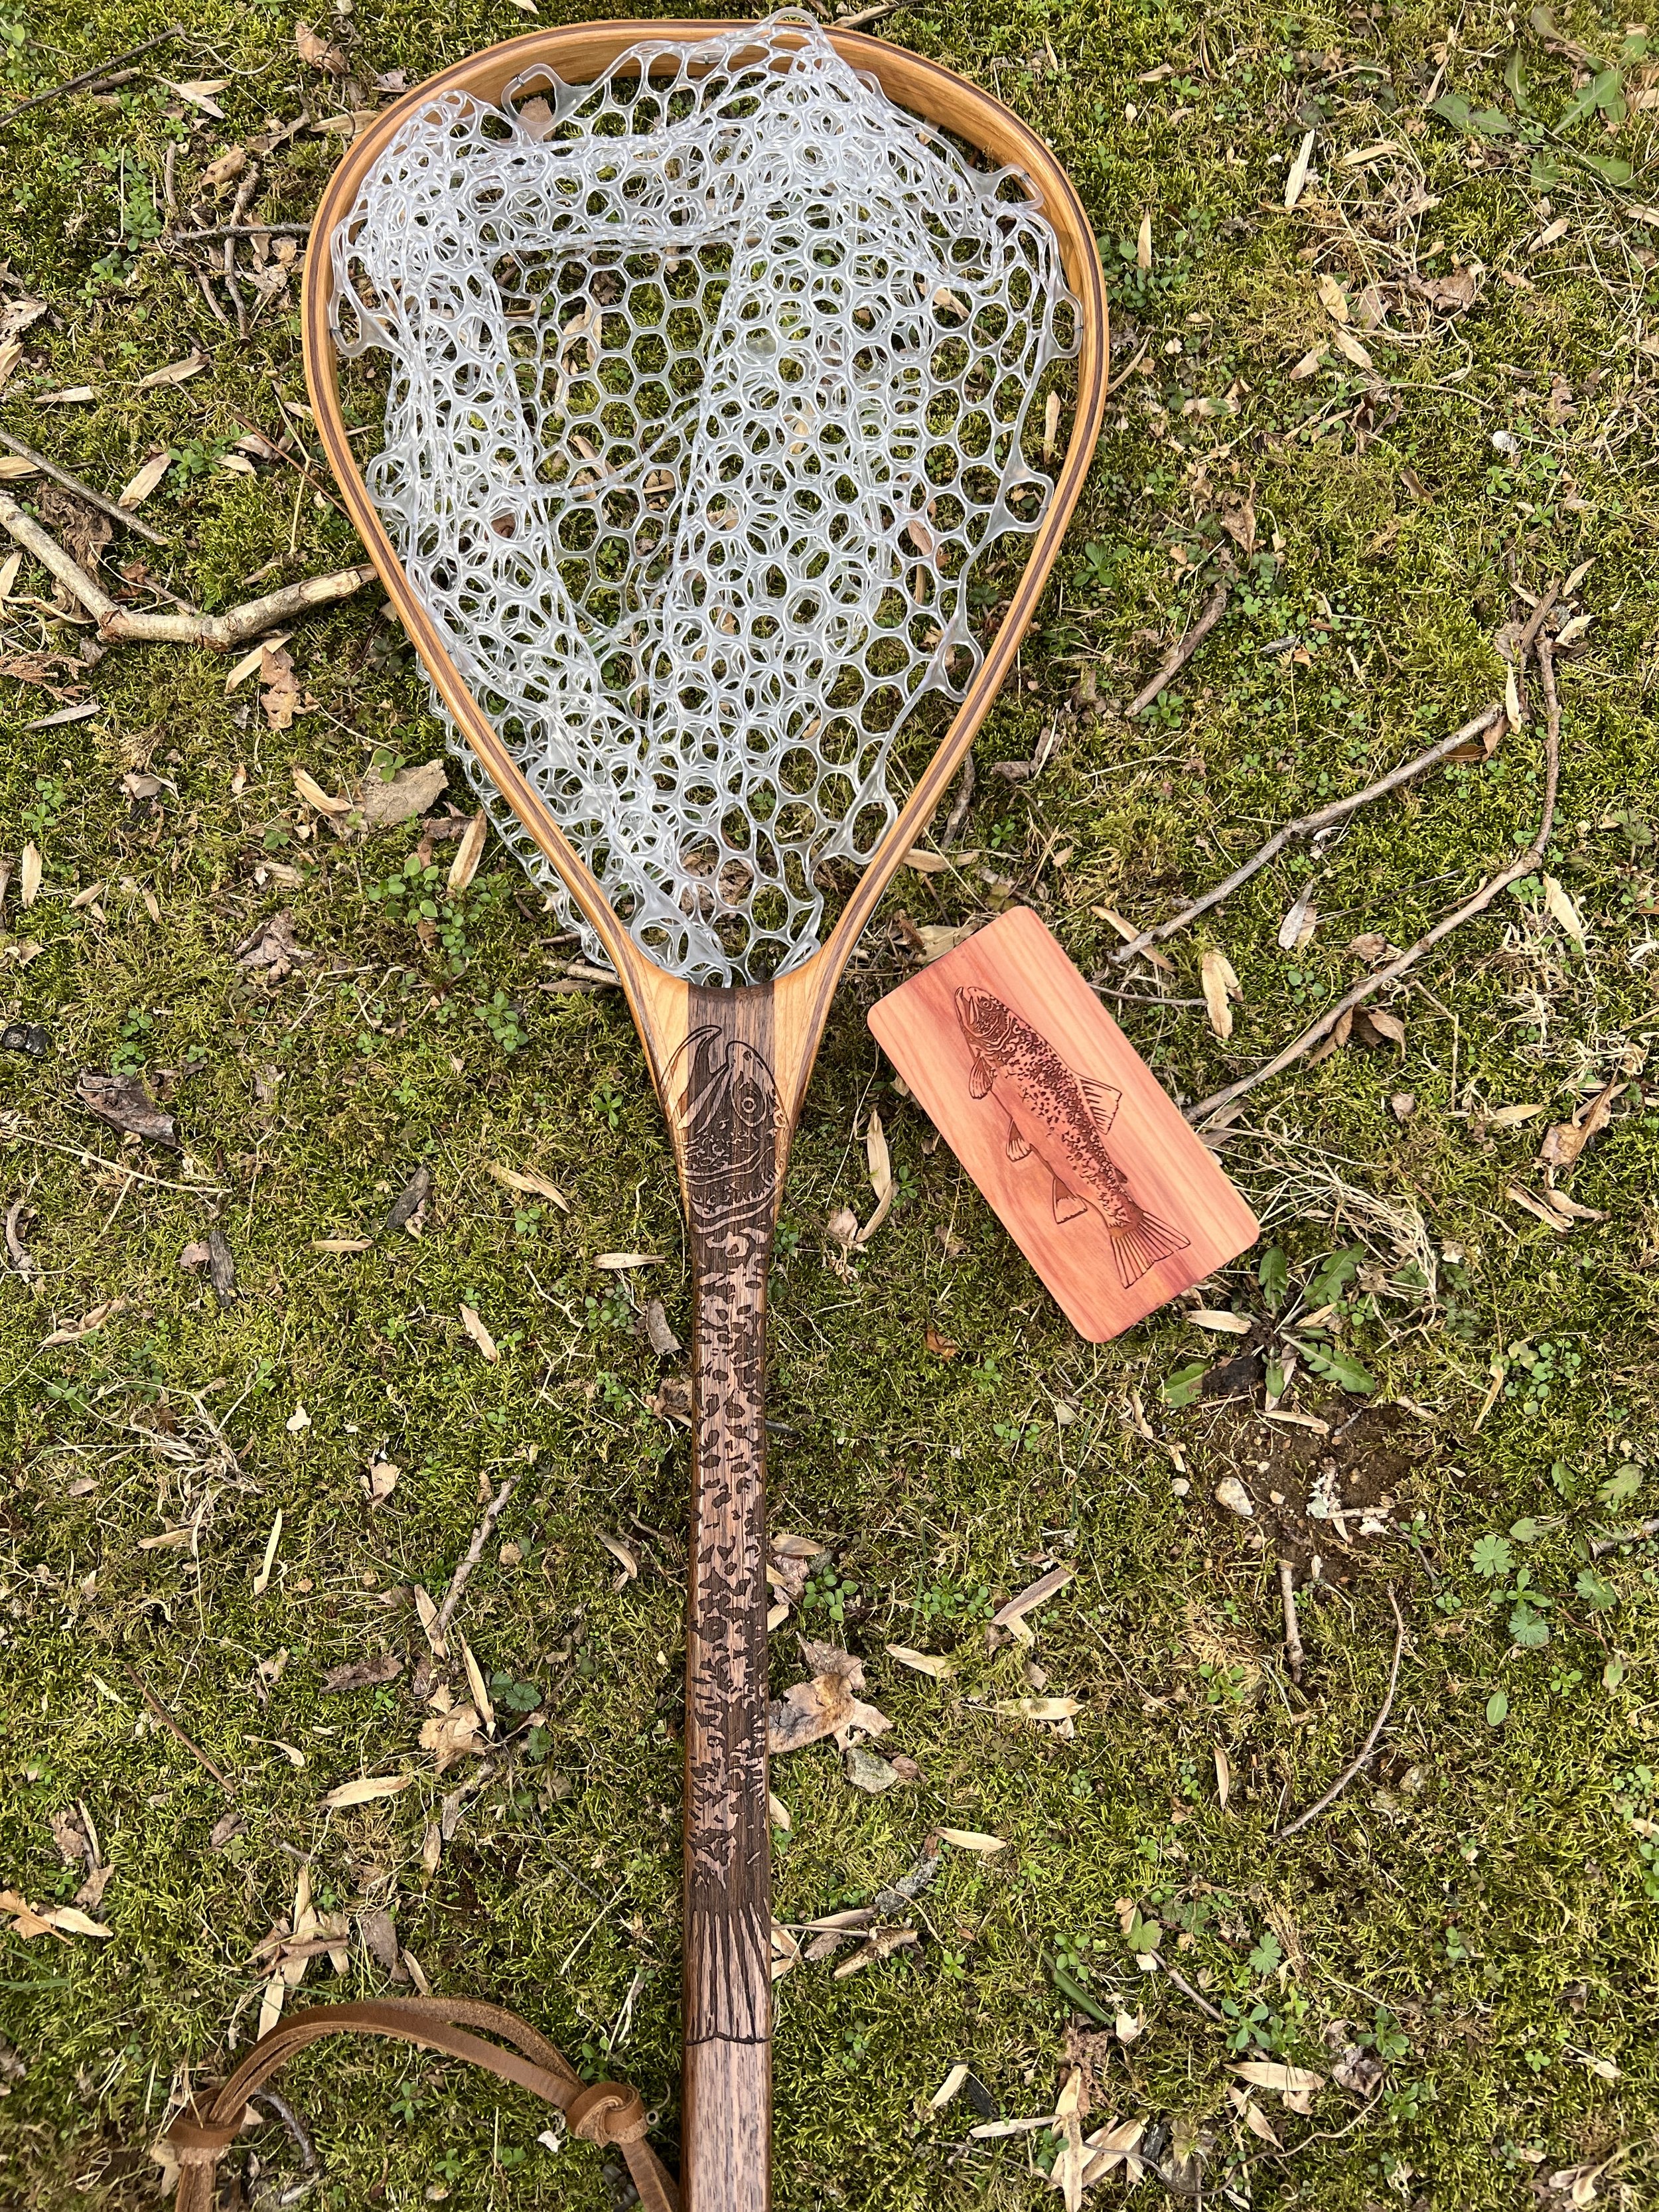 In-stock Designs and Gifts — Wayward Handcrafted Fly Fishing Gear - made in Philadelphia  USAWood Fly Fishing net - Handcrafted Custom Fly Fishing net made in the USA